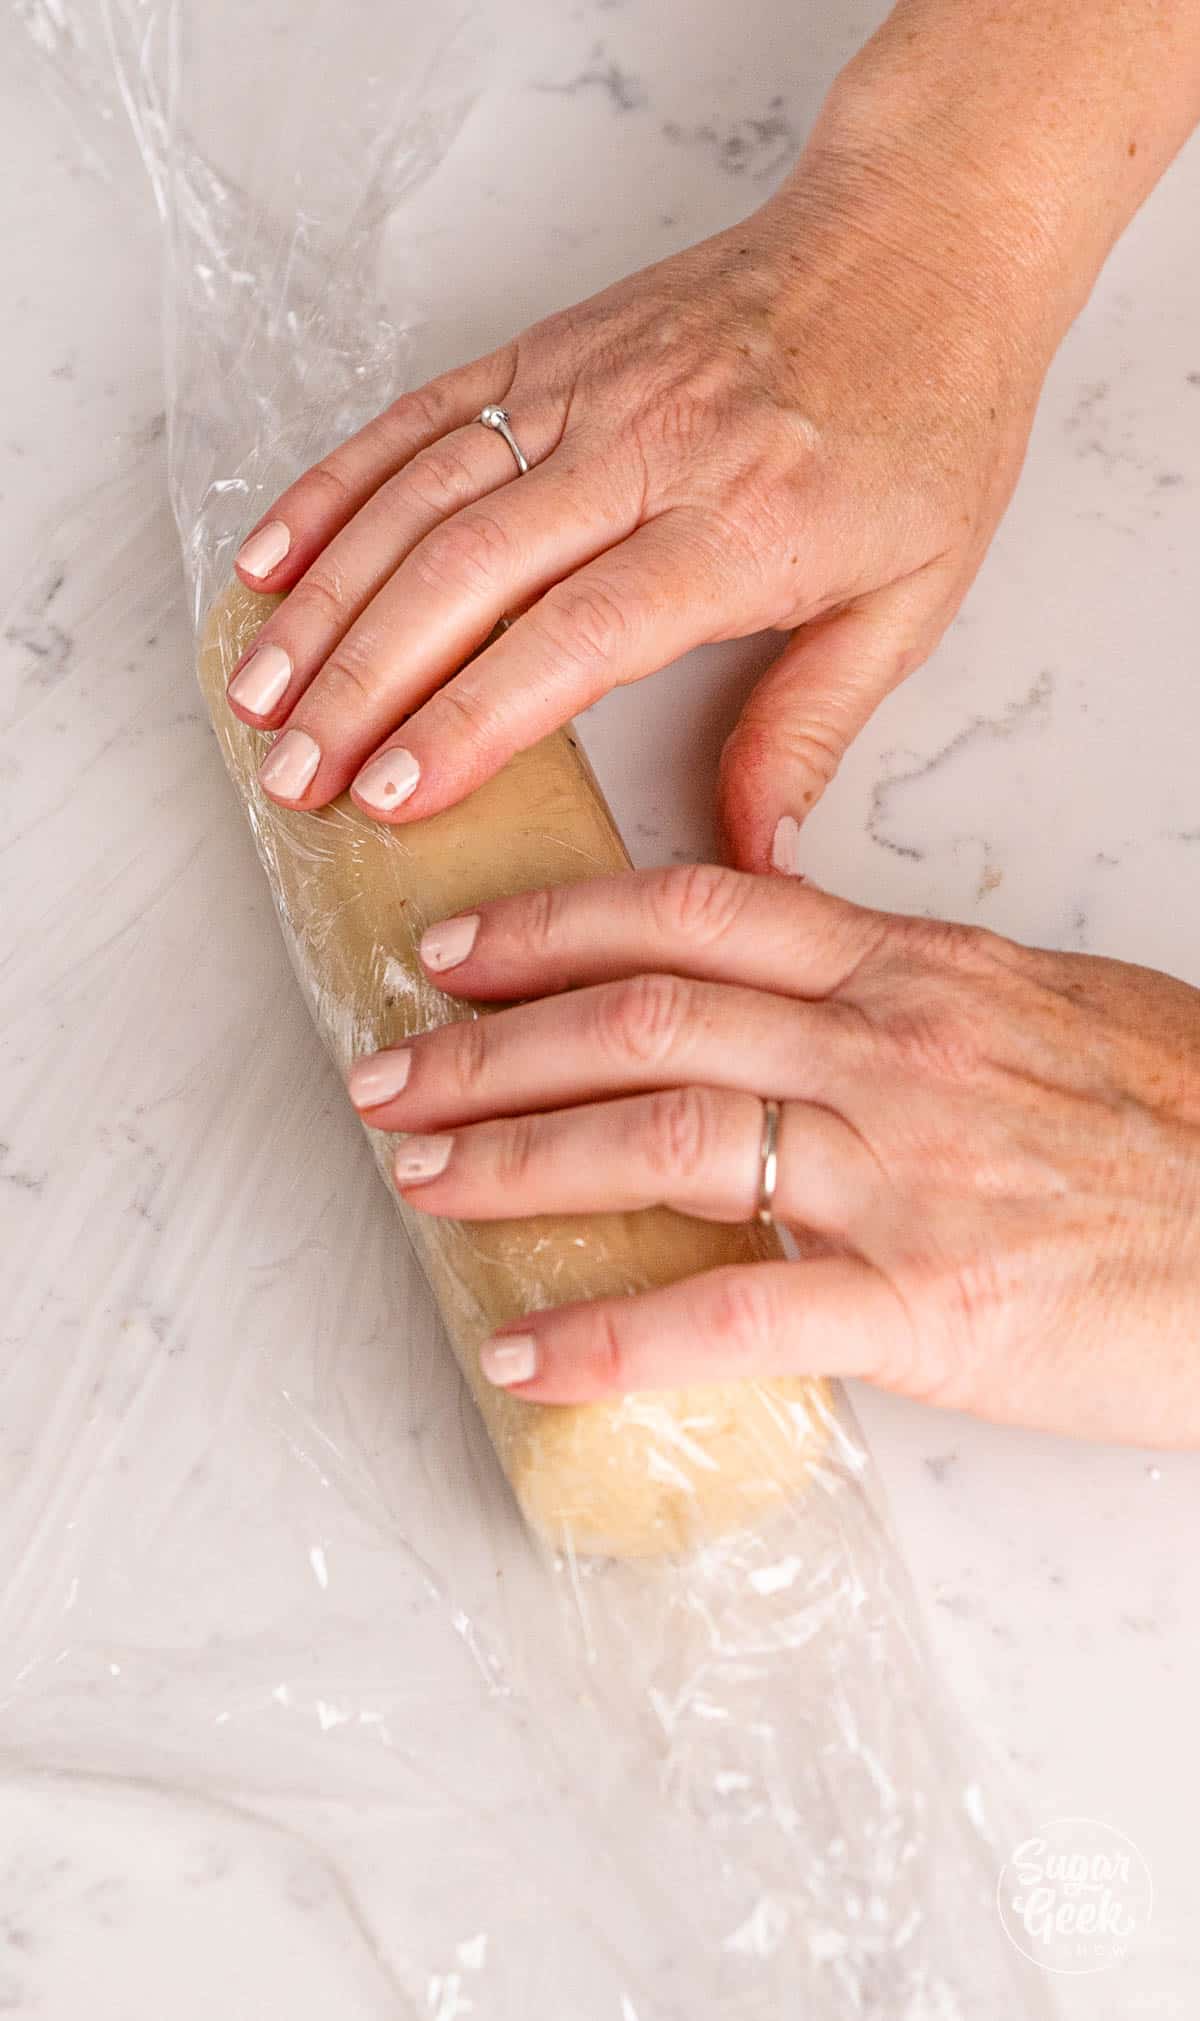 hands wrapping marzipan in plastic wrap. 